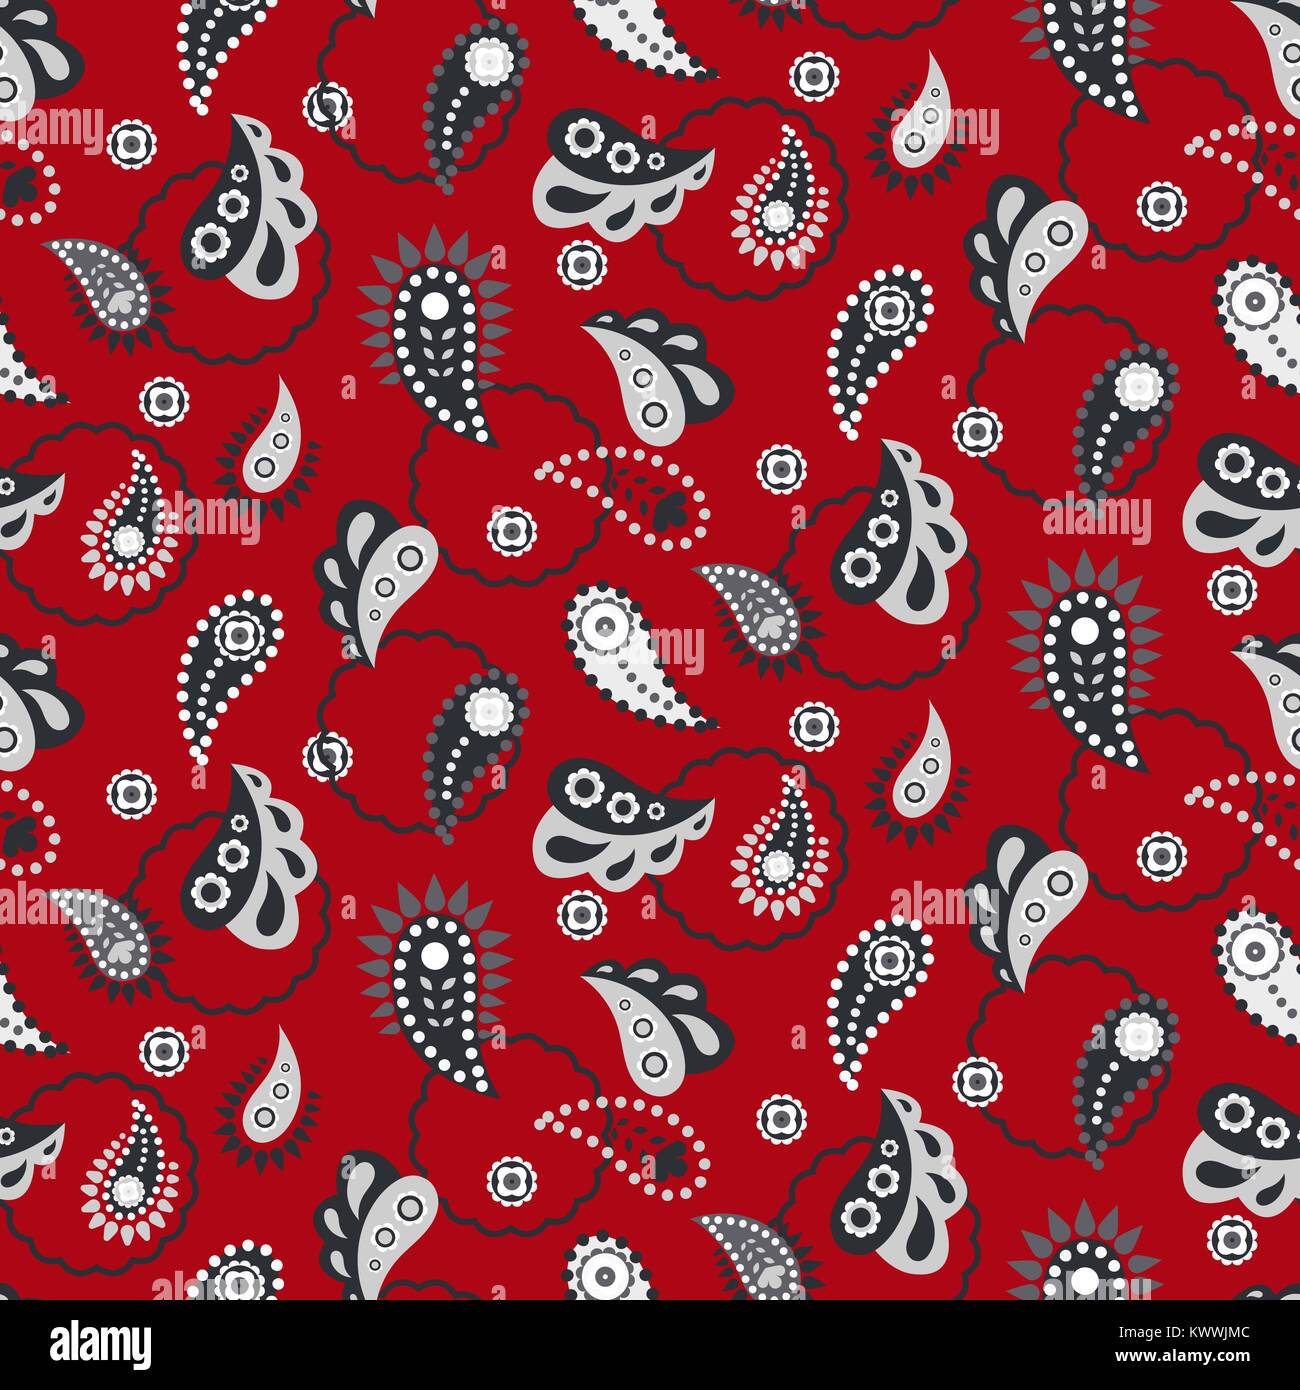 Paisley pattern on yellow background, seamless gold, red and white